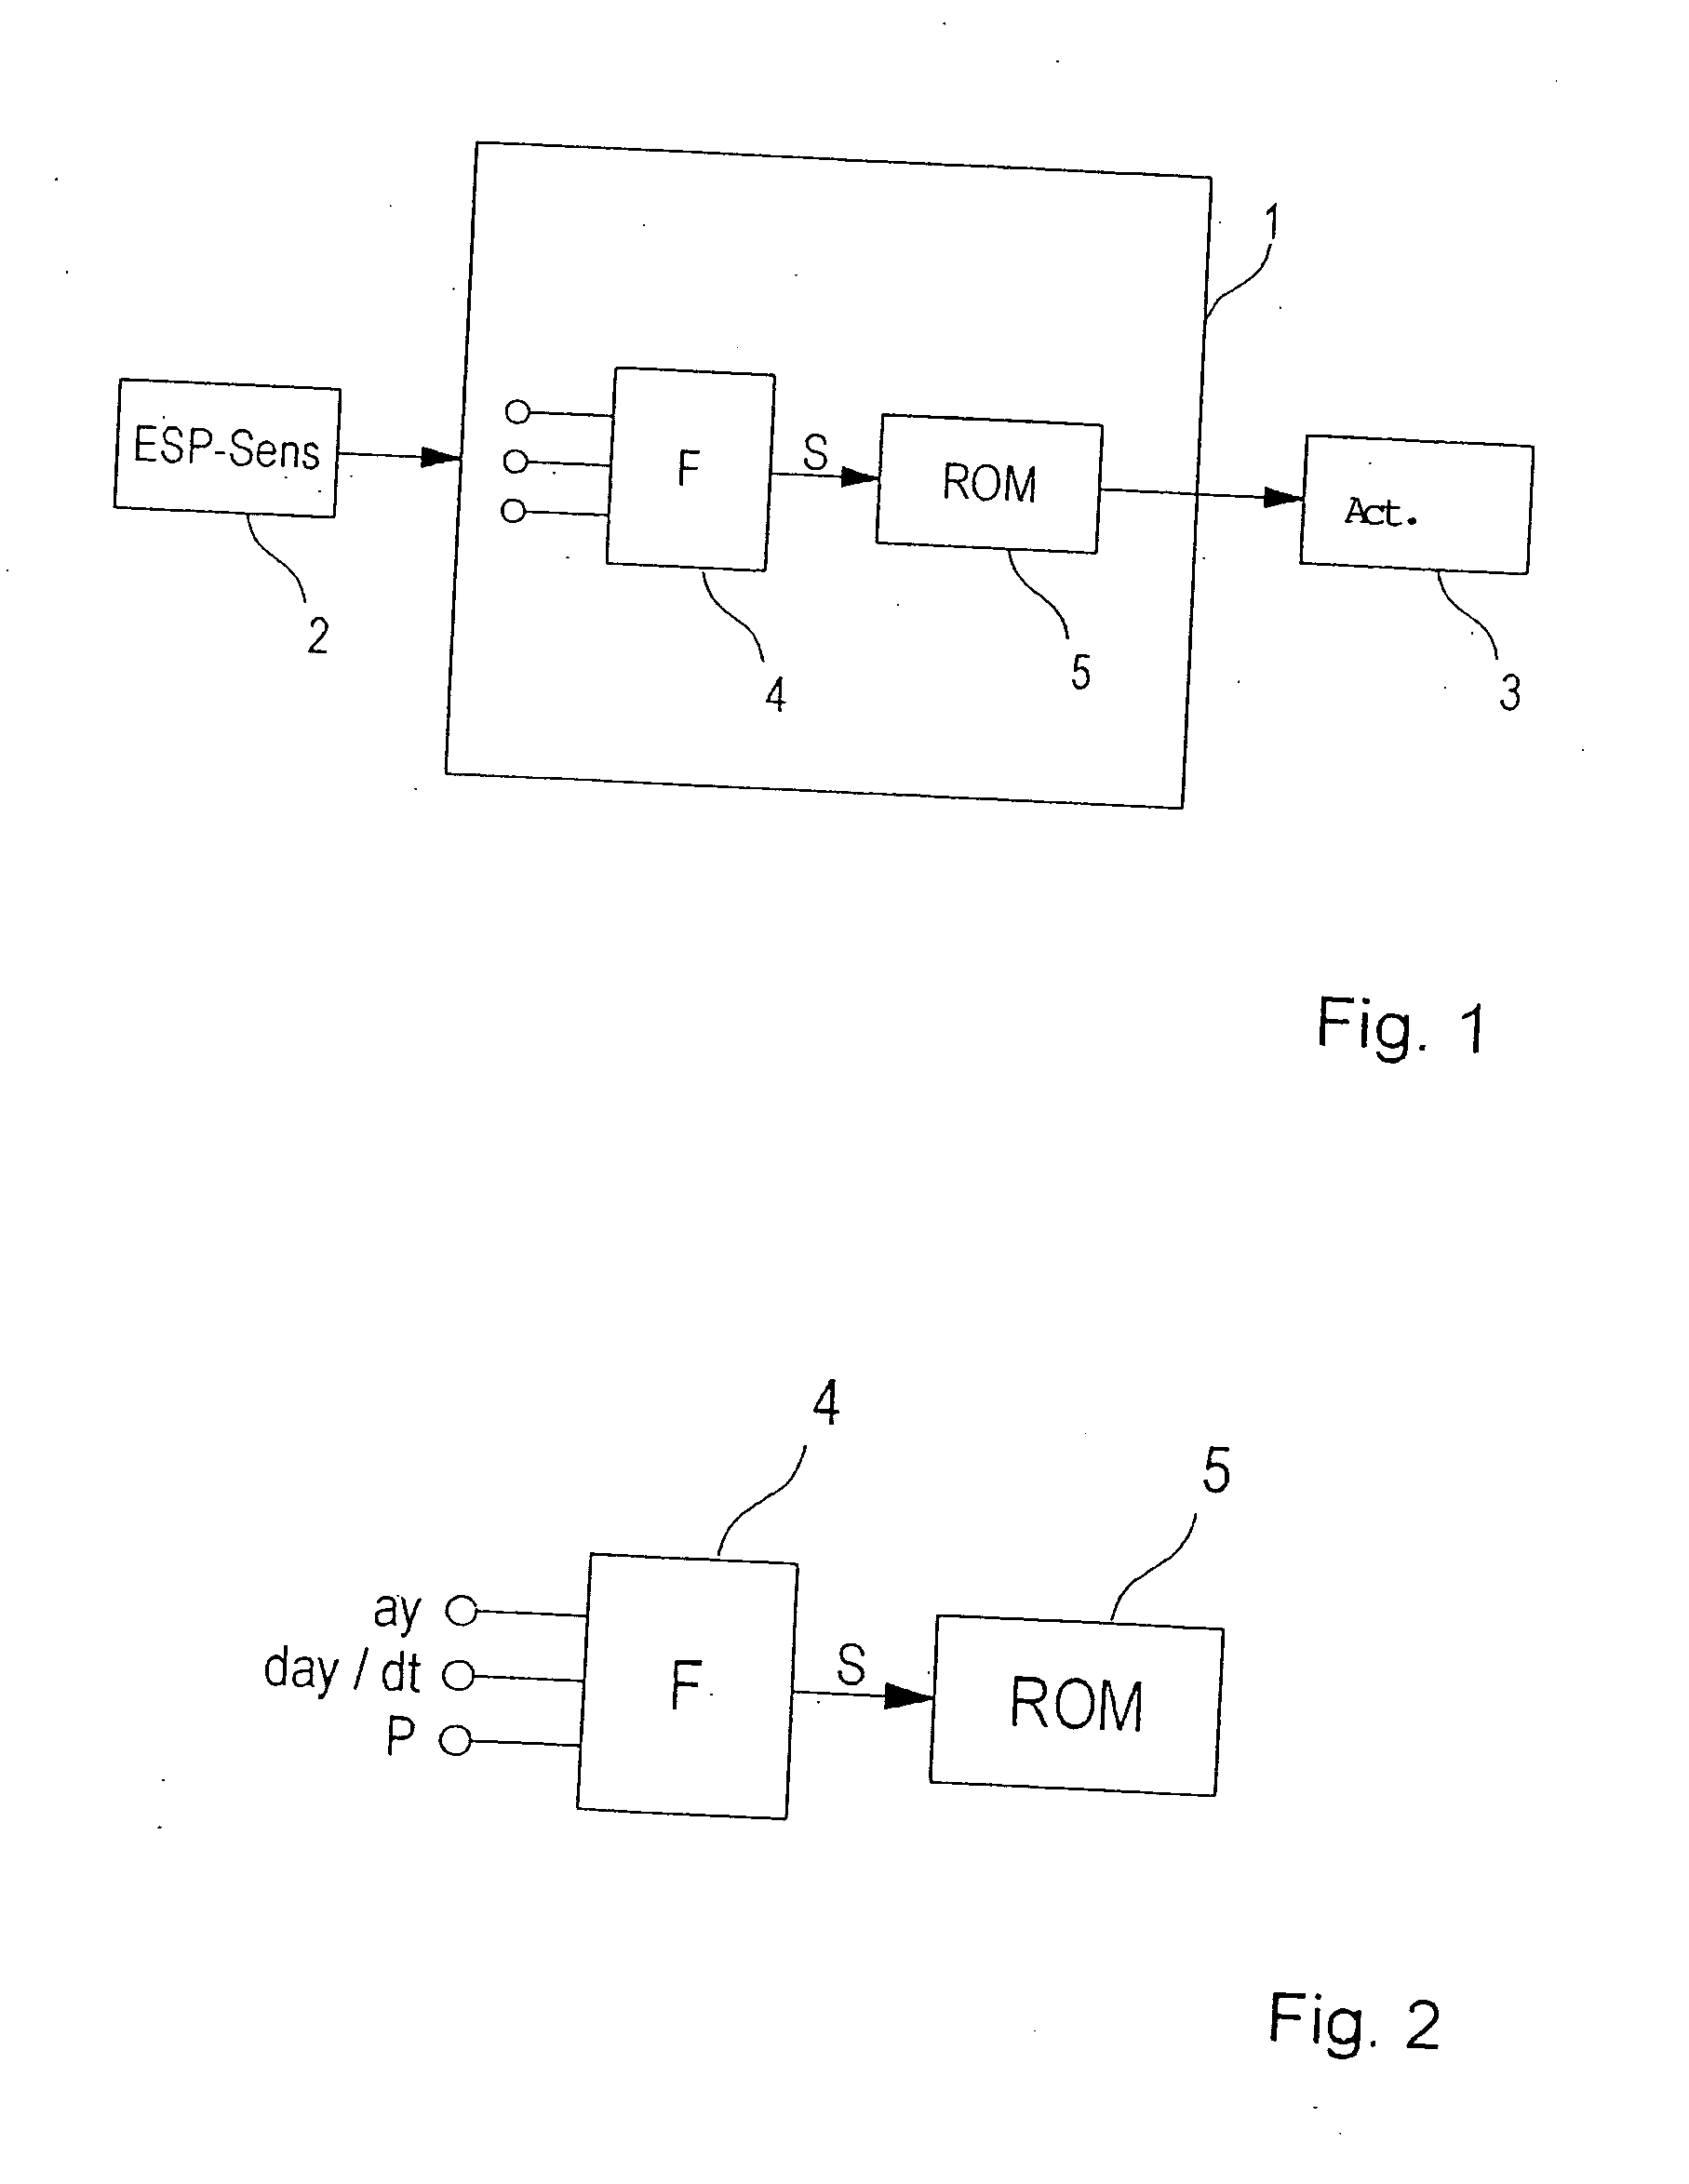 Vehicle dynamics control system adapted to the load condition of a vehicle